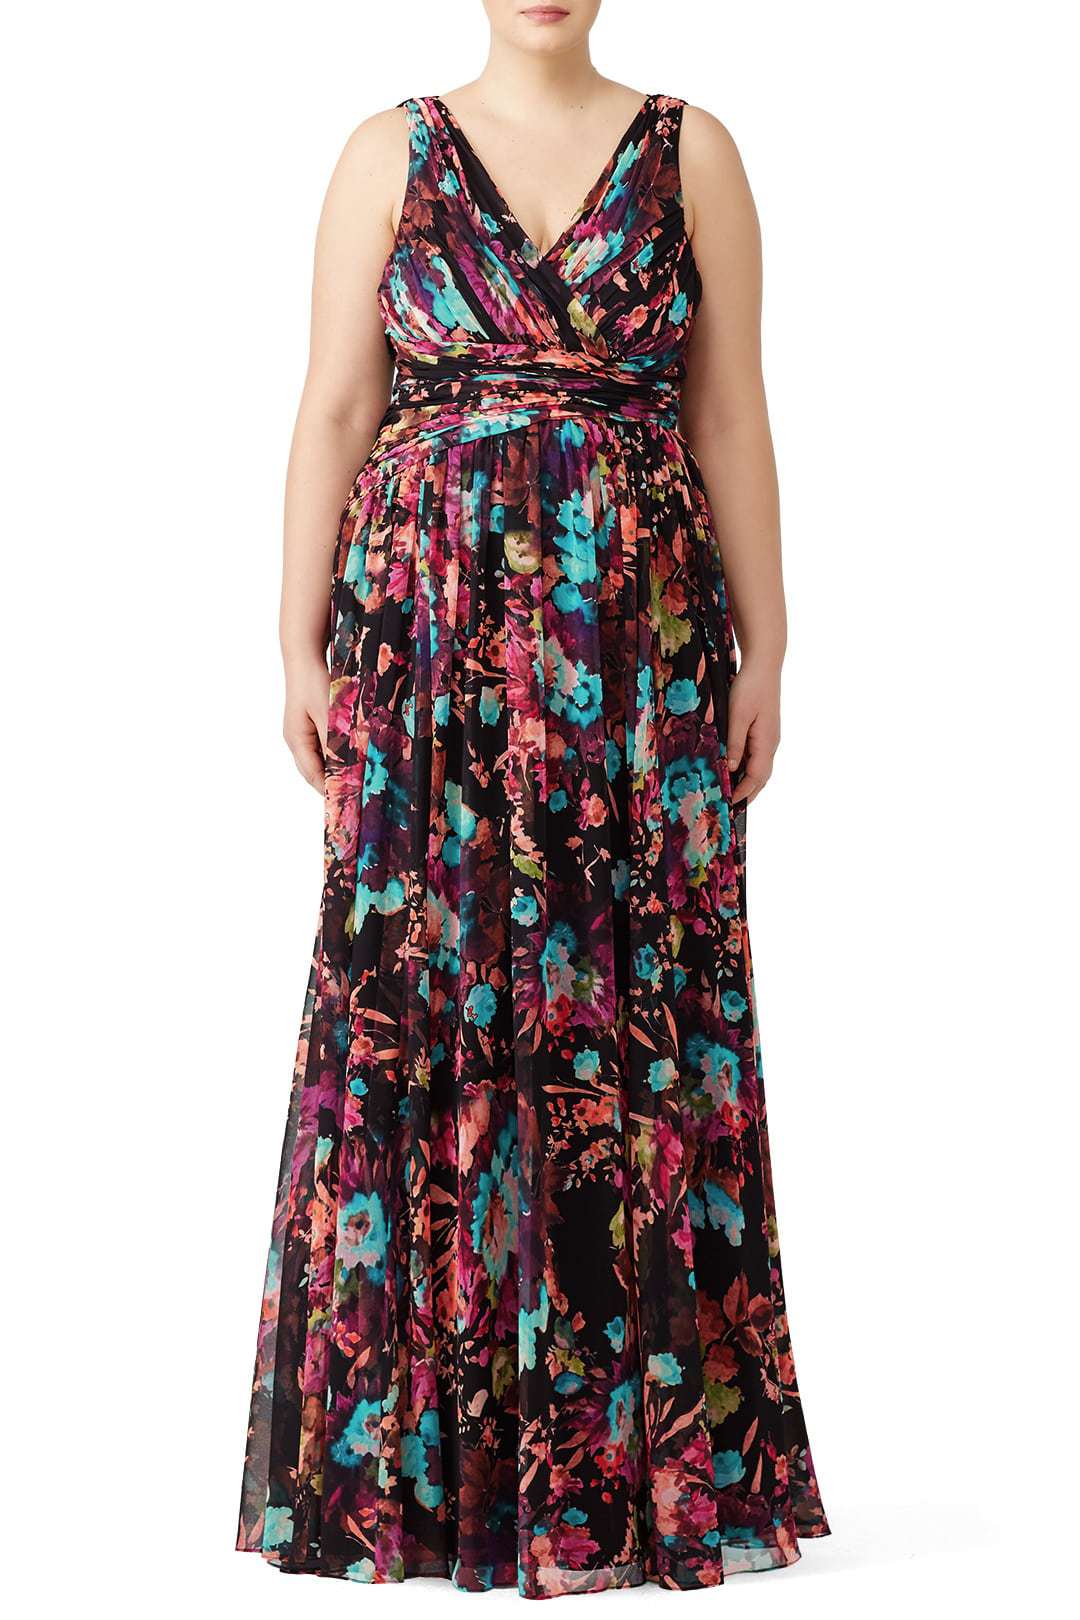 Badgley Mischka plus size floral gown from Rent the Runway